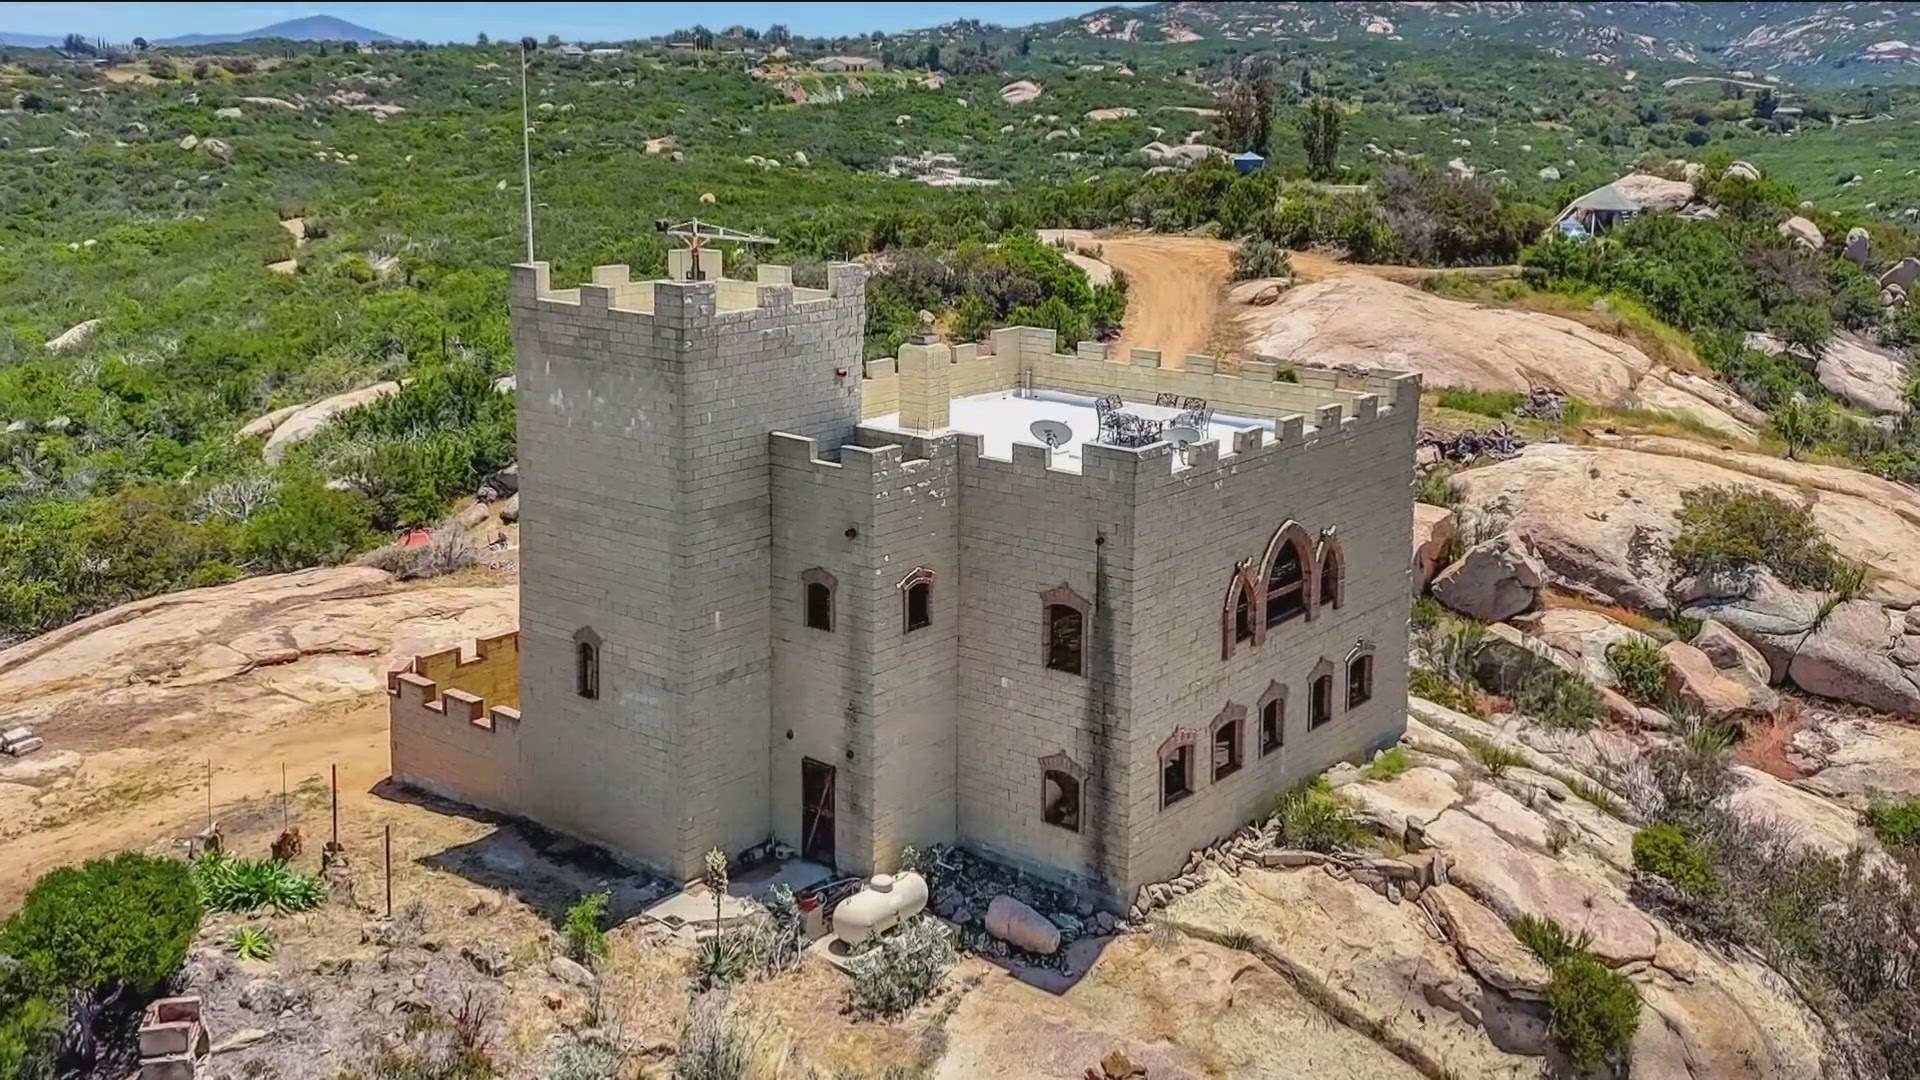 A custom-built castle, which sits in the middle of 58 acres of land, is up for sale in Jamul with an interesting backstory.